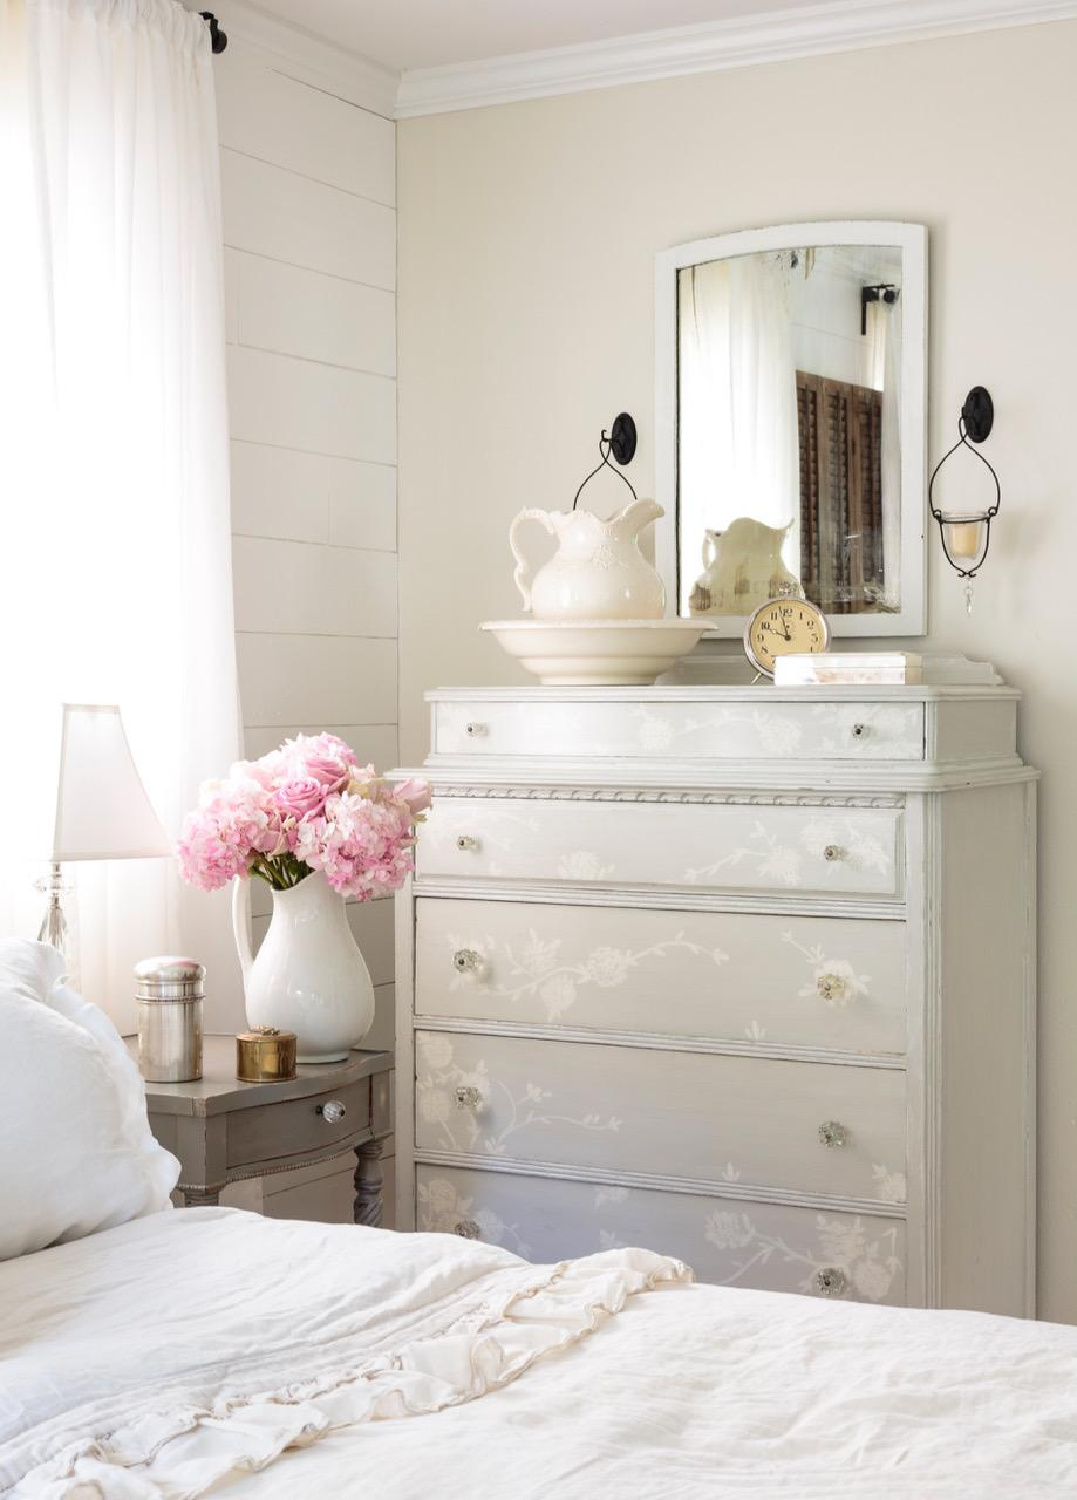 Serene, romantic, ethereal white painted dresser in Fifi O'Neill's SHADES OF WHITE (CICO Books, 2021). #fifioneill #whiteinteriors